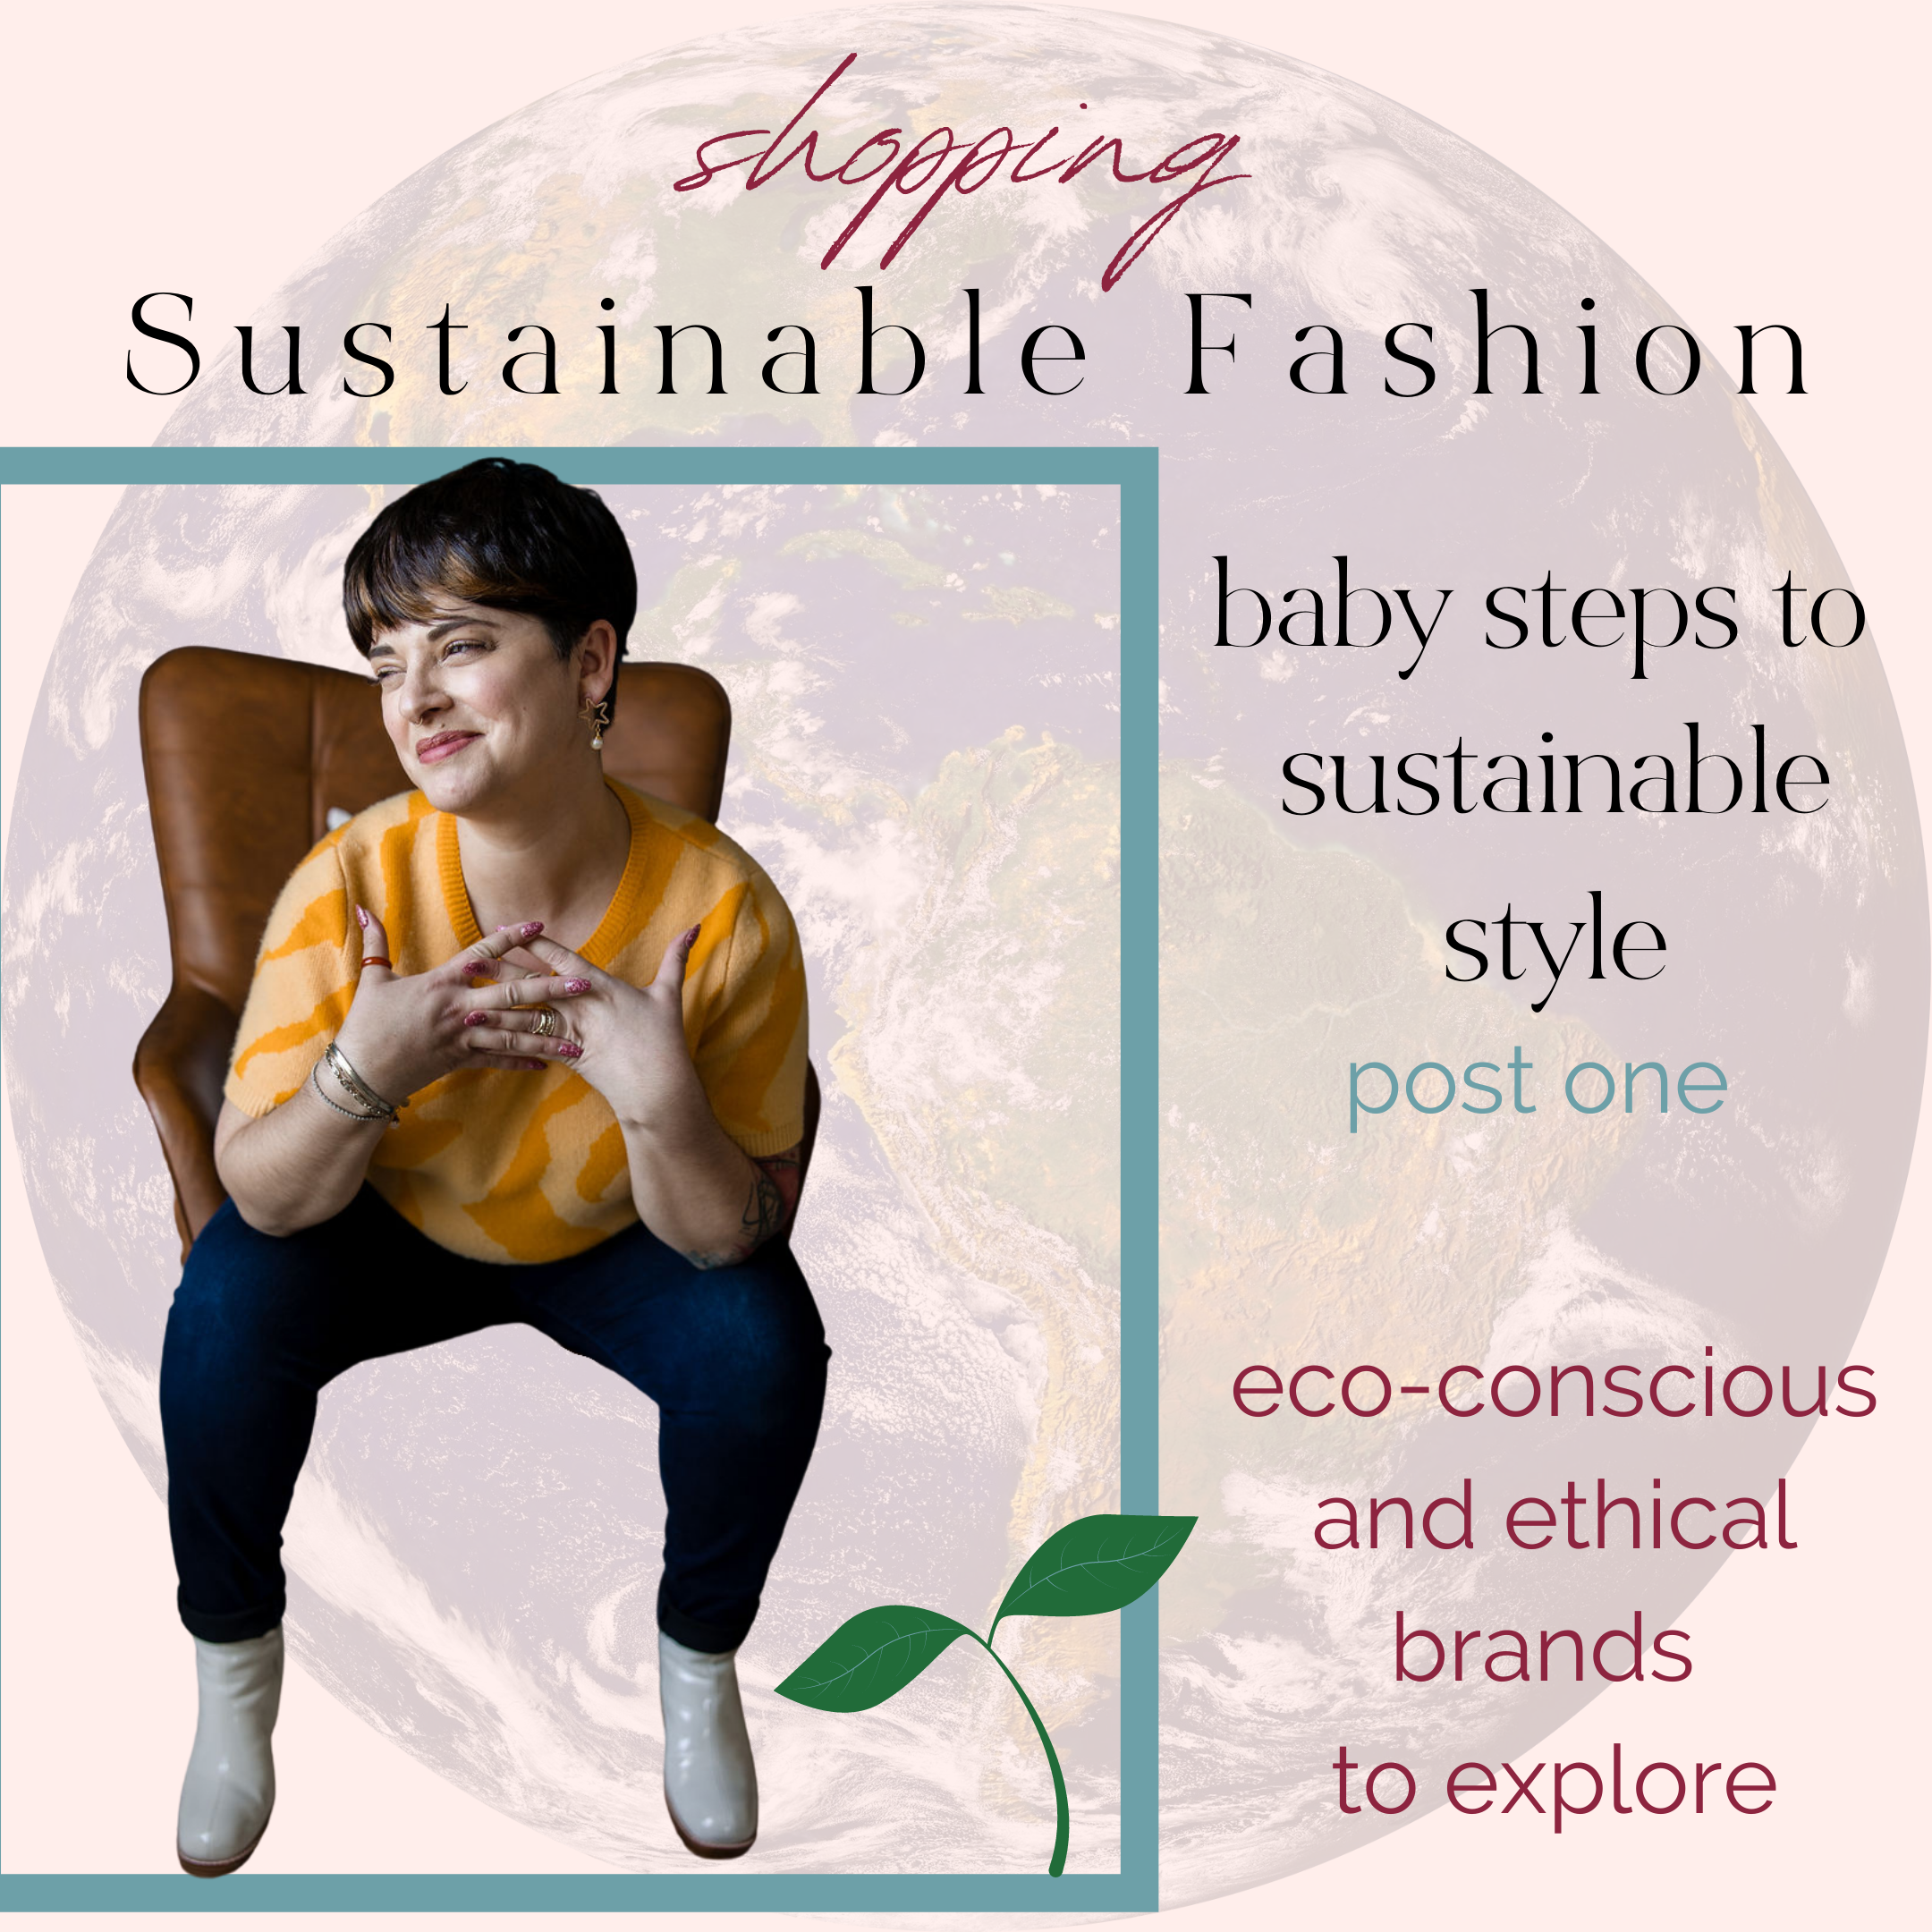 Shopping Sustainable Fashion: Eco-Conscious and Ethical Brands to Explore